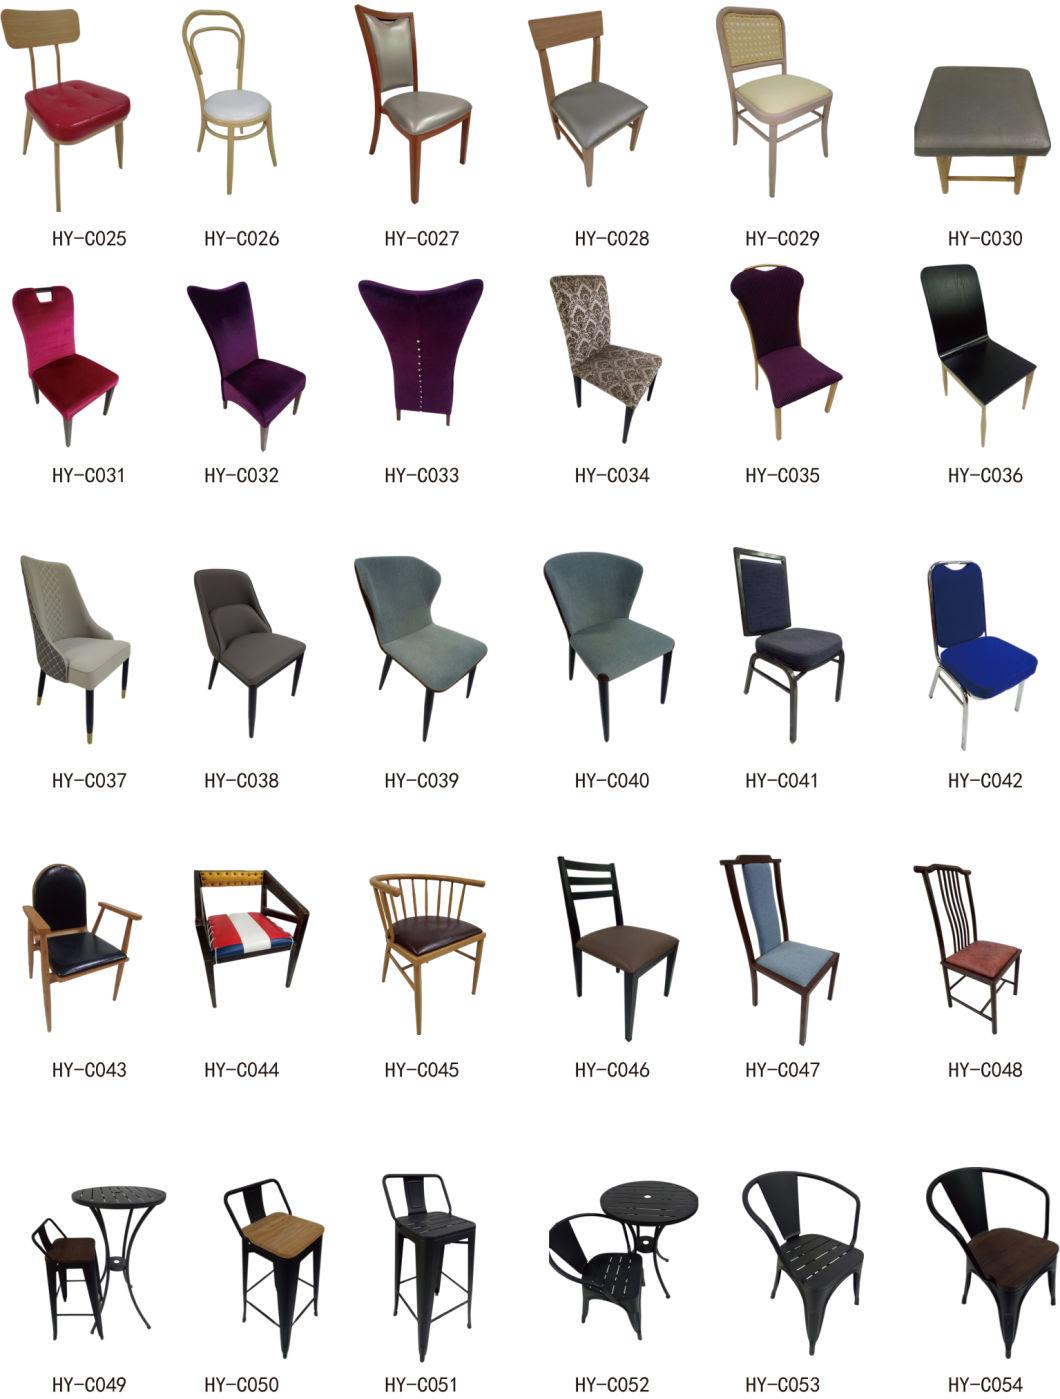 Modern Hotel Chair Stainless Steel Furniture Gold Metal Wedding Chairs Decoration Chairs Events Chairs Banquet Furniture Wedding Luxury Gokd Round Rim Chairs